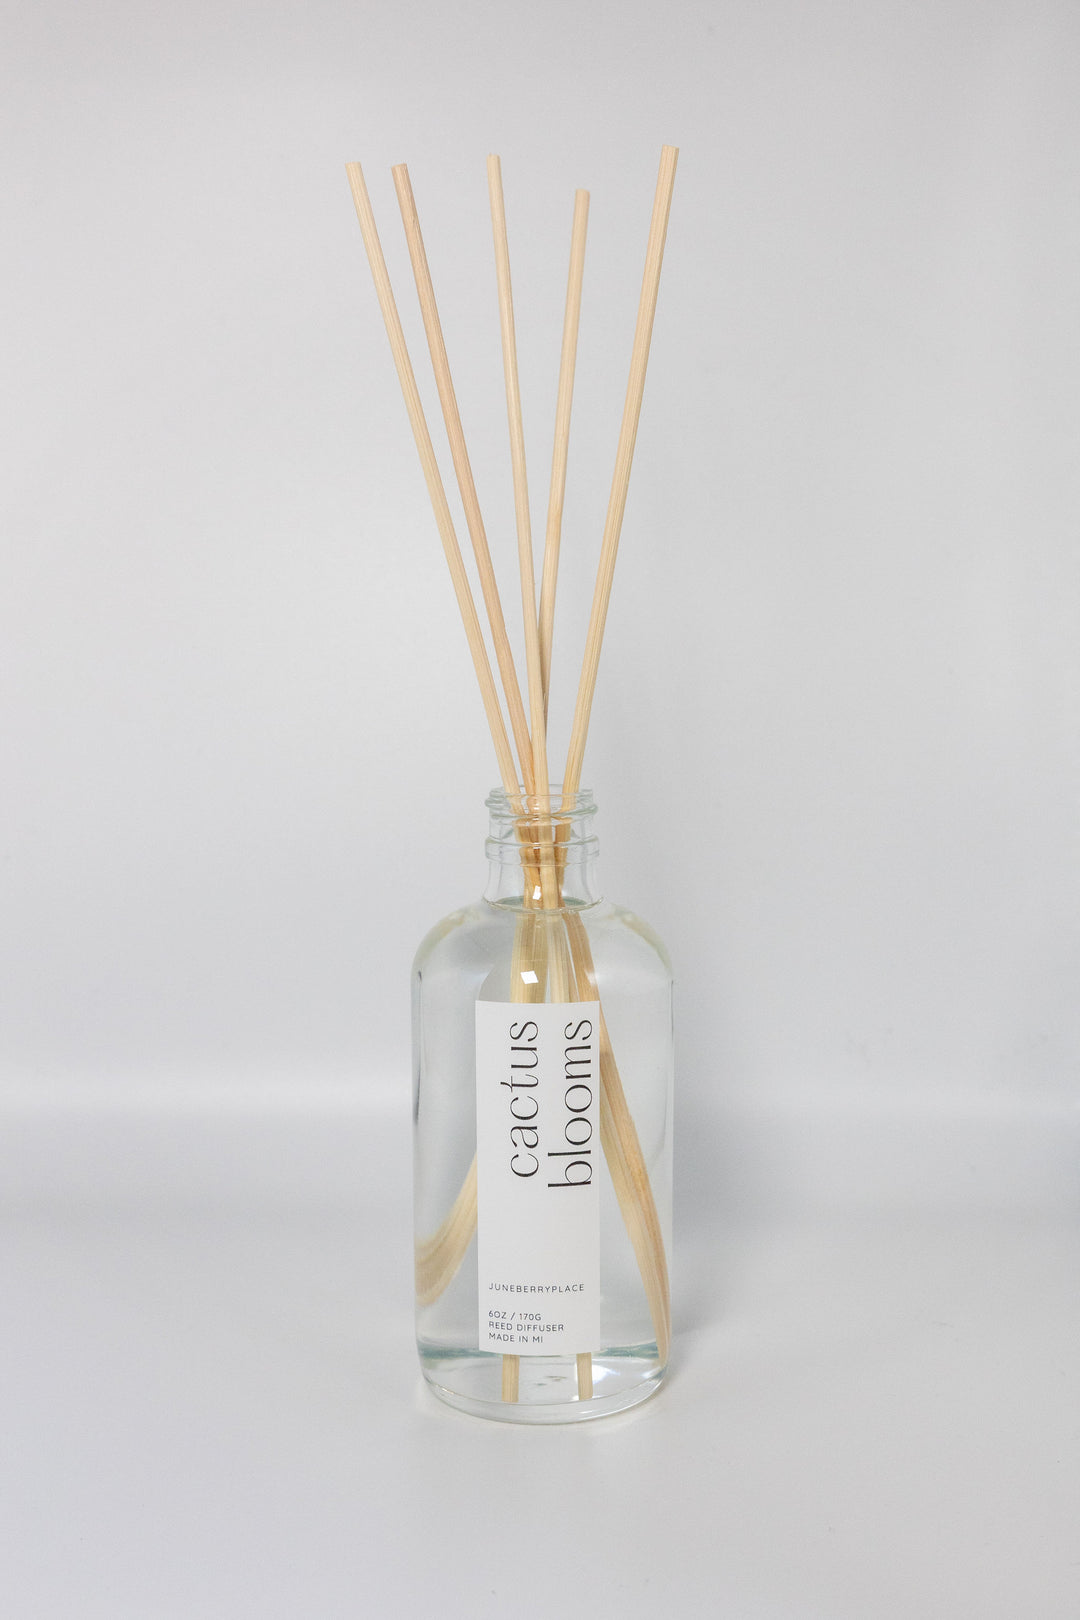 Cactus Blooms Reed Diffuser with Reeds - Summer Collection in a glass bottle by juneberryplace home fragrances